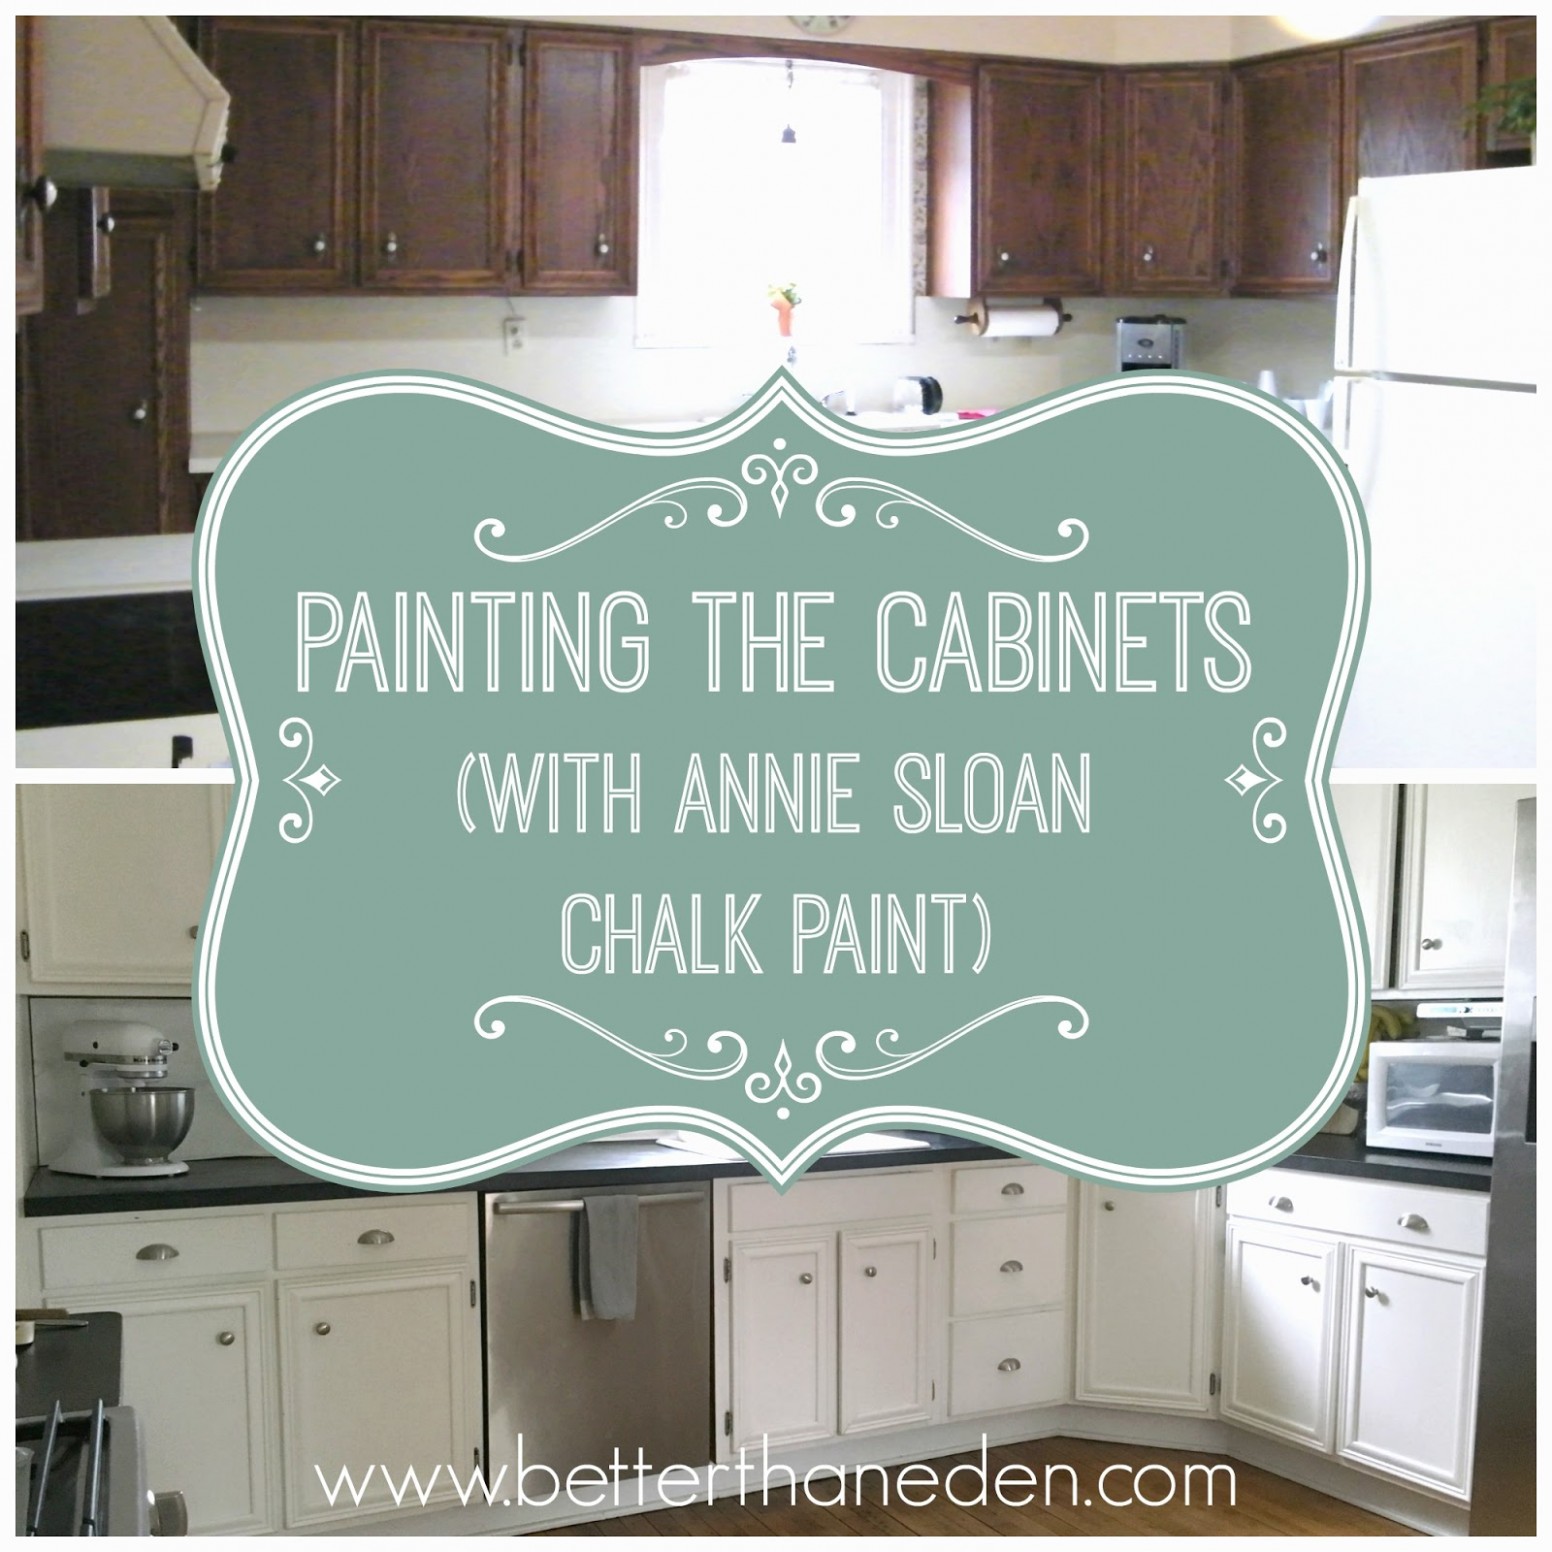 The Kitchen Project Painting The Cabinets And My Annie Sloan ..